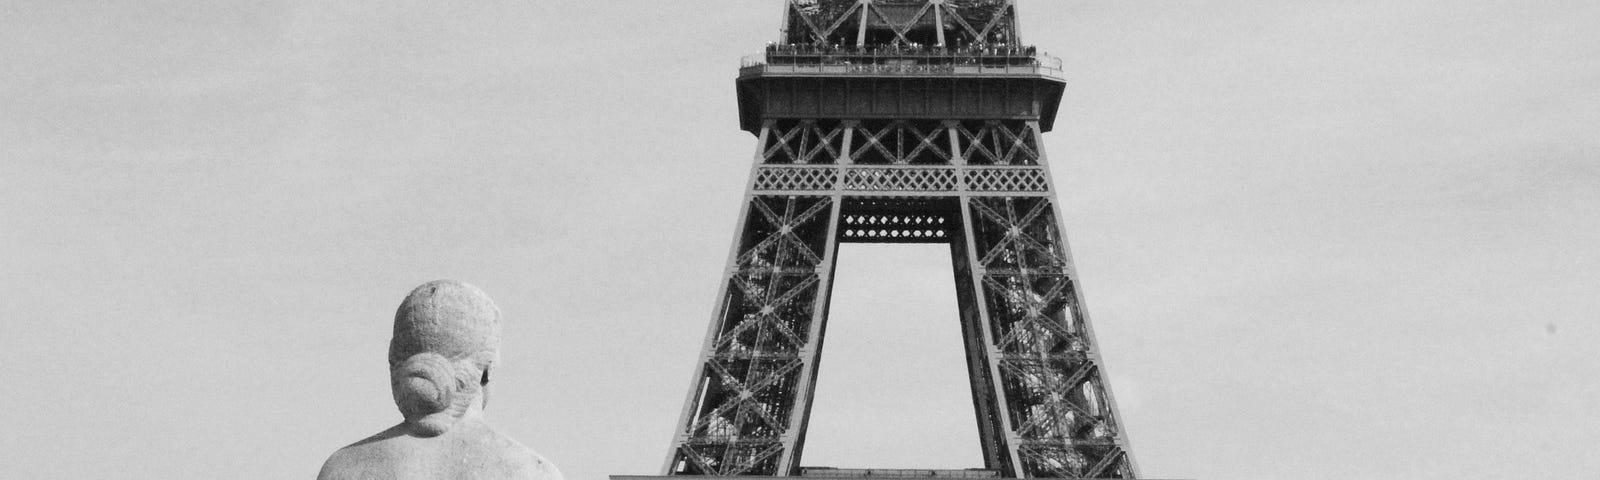 A statue of a woman, looking at the Eiffel tower. She is seated, her is back to the camera. Black and white photograph.